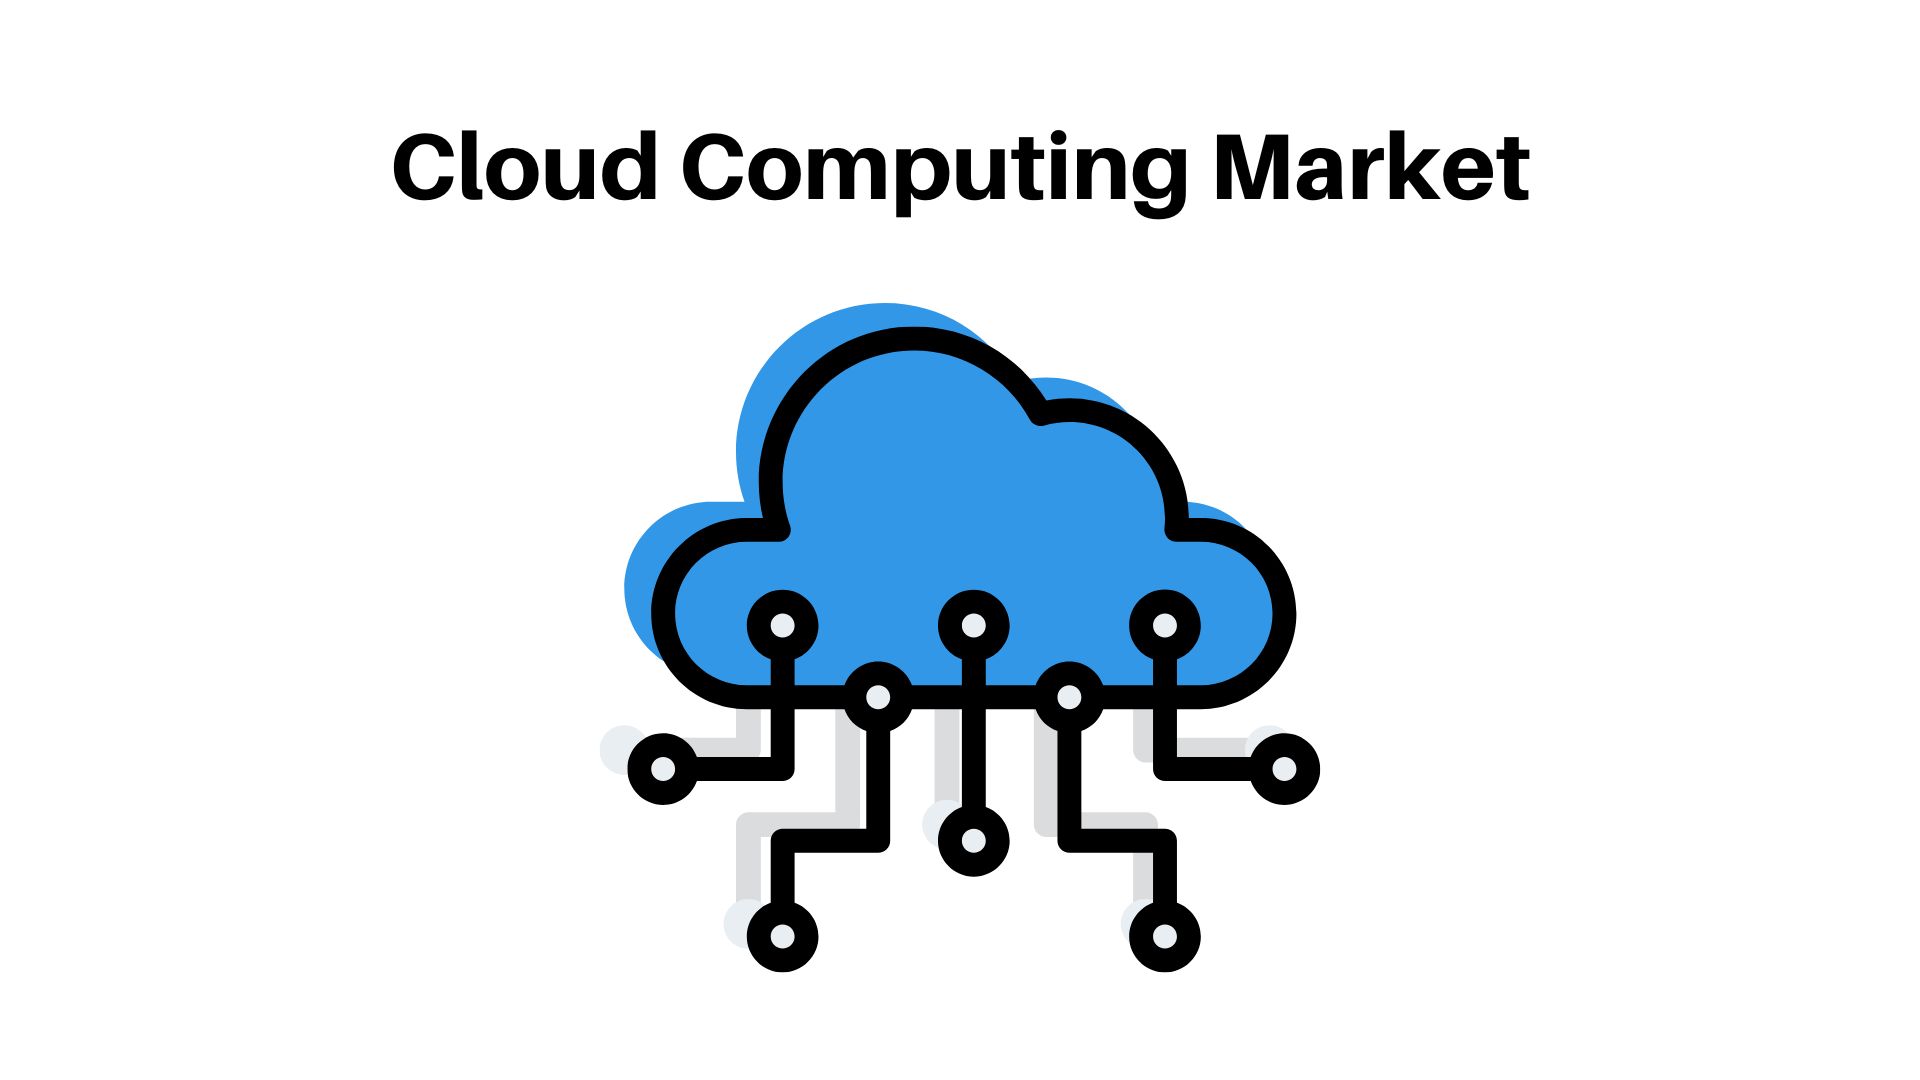 Cloud Computing Market Size Is Projected To Surpass USD 2972.62 billion by 2032 | CAGR of 19%